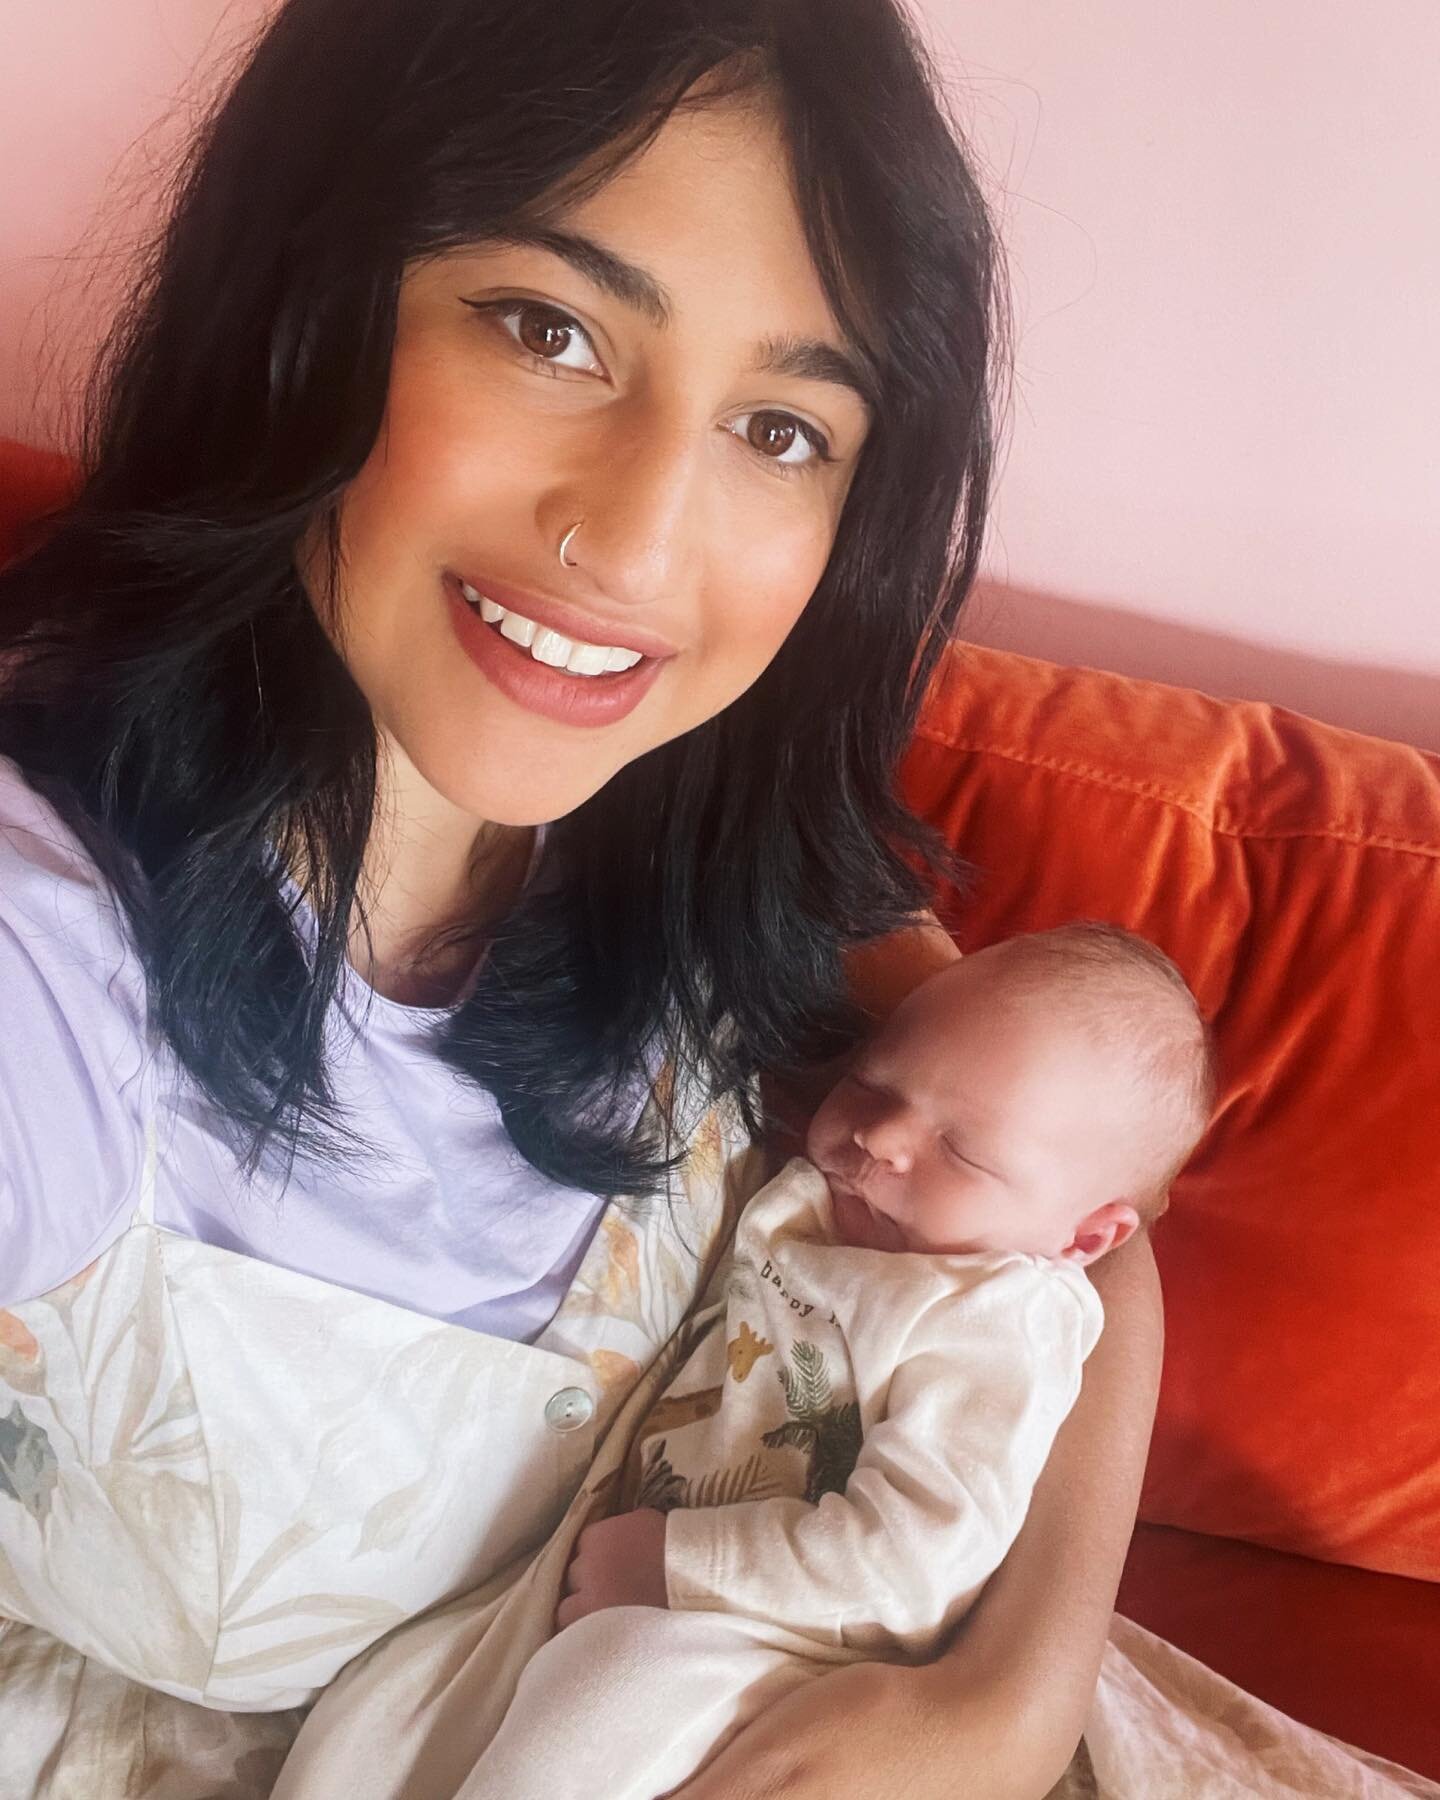 Perks of the job&hellip;.meeting the fresh little bundles after they arrive and getting cuddles 🥰🥰🥰 nothing quite like it! I mean look at this perfect little chappy&hellip;.welcome to the world little one - you are going to be so loved! ⭐️⭐️⭐️⭐️⭐️